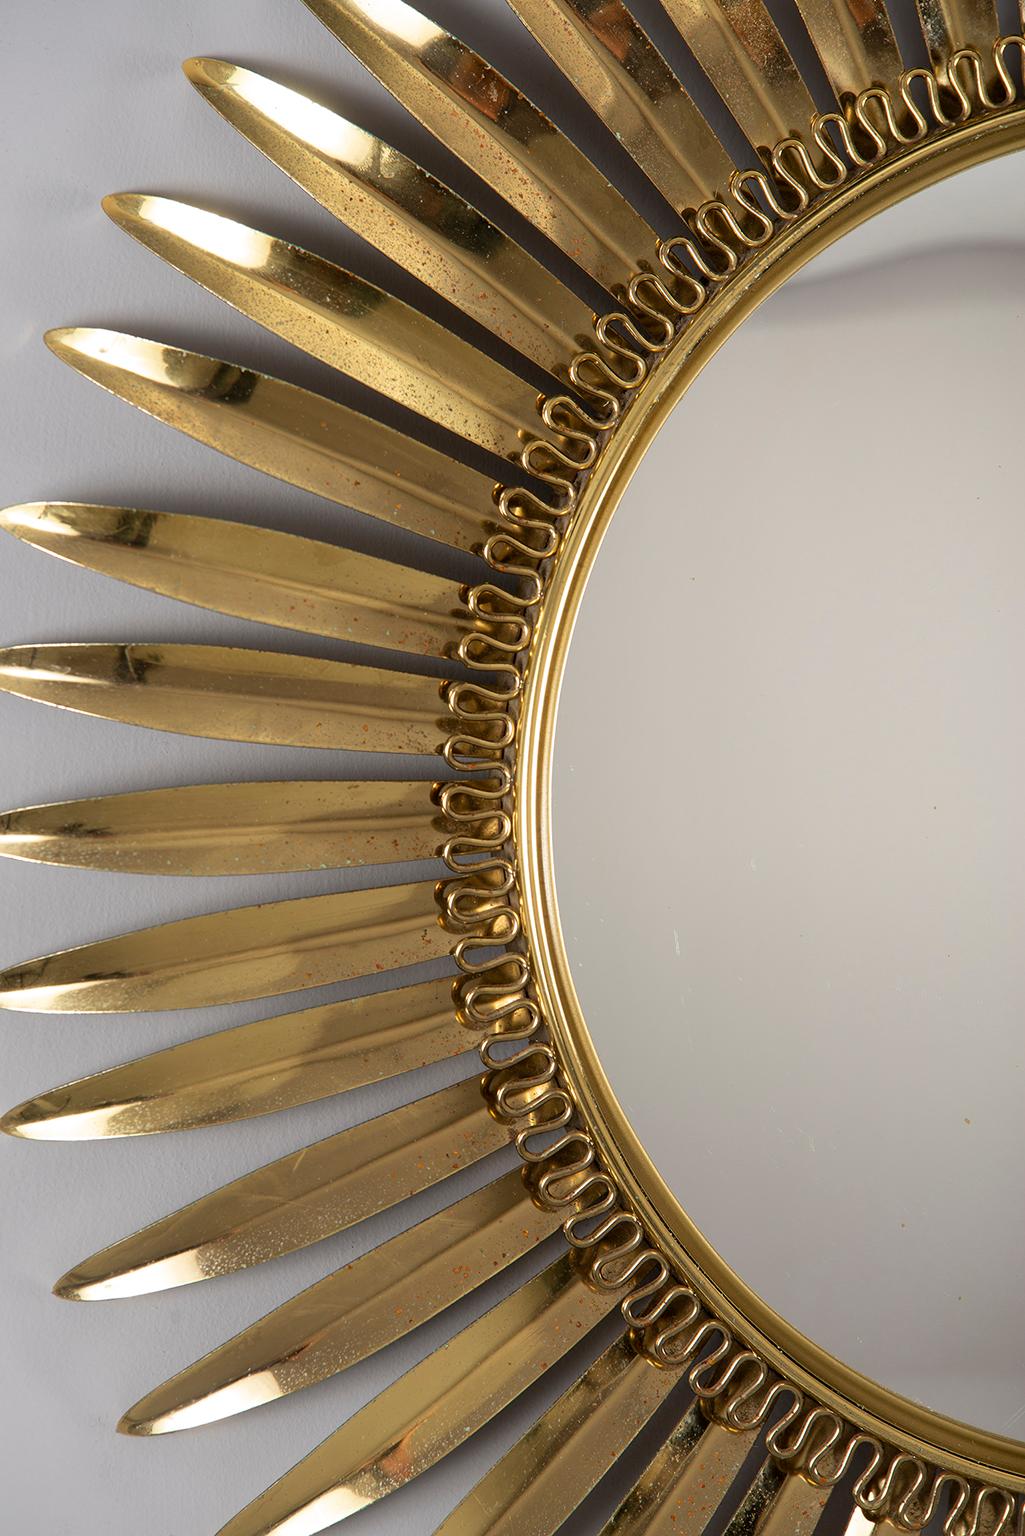 Gold tone metal framed sunburst mirror found in Italy, circa 1960s. Center mirror is convex. Minor scattered surface wear to metal frame.